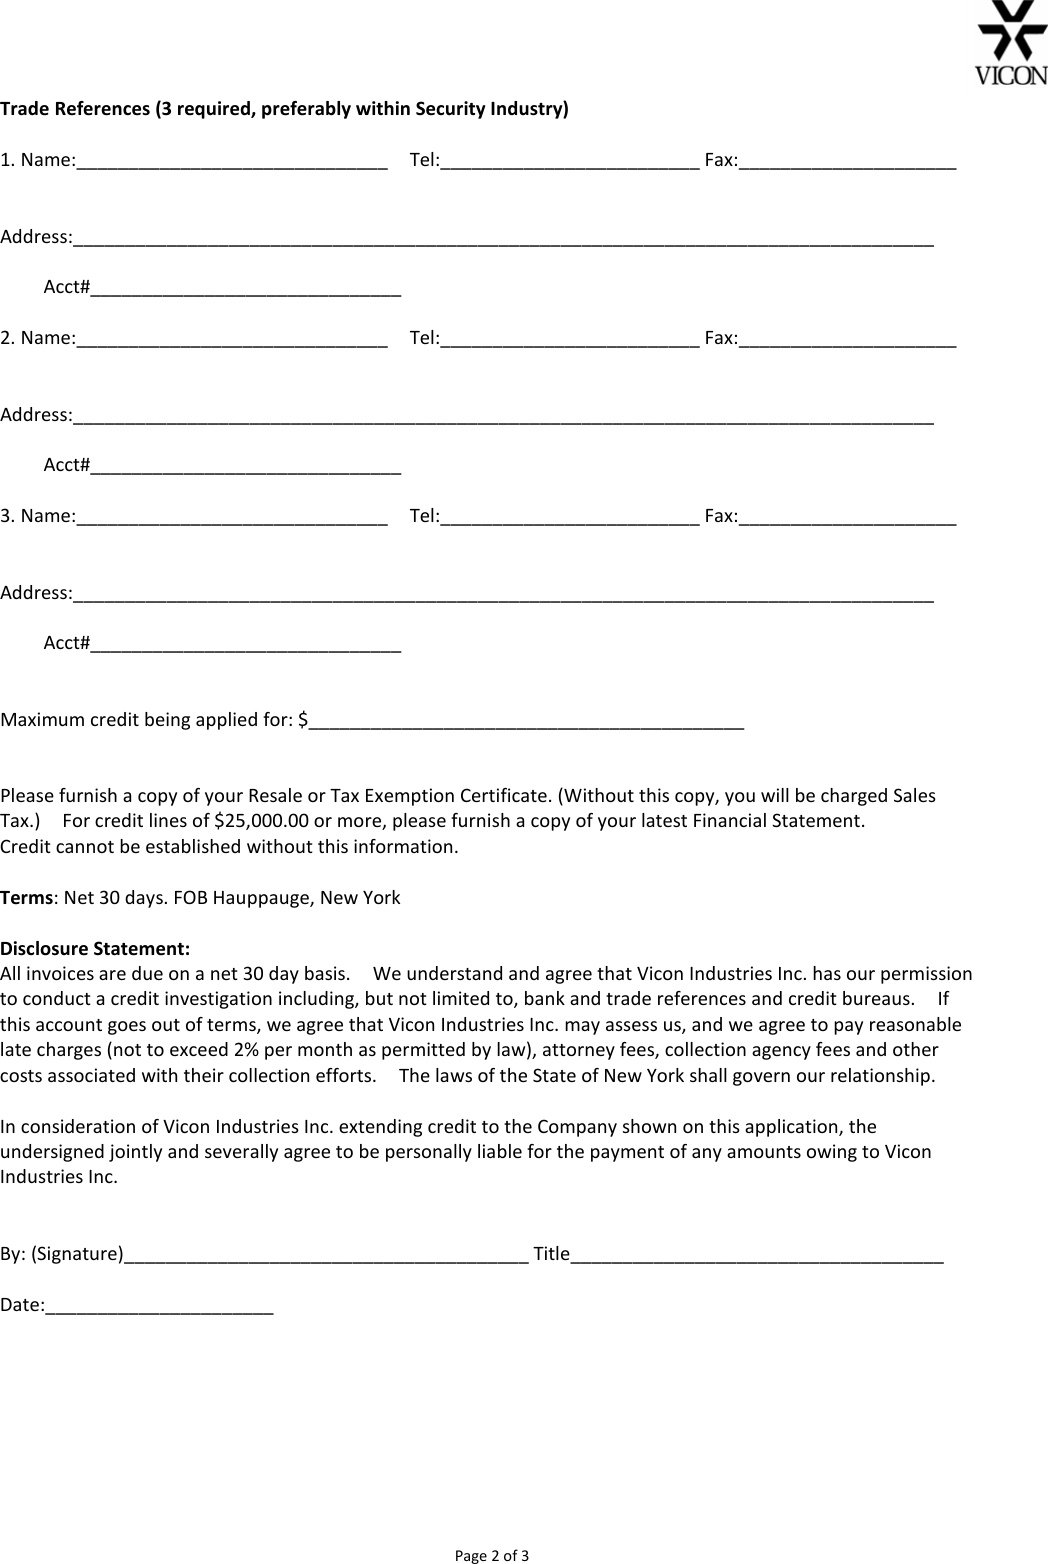 Page 2 of 3 - Security Newdealercreditapplicationform User Manual New Dealer Credit Application Form